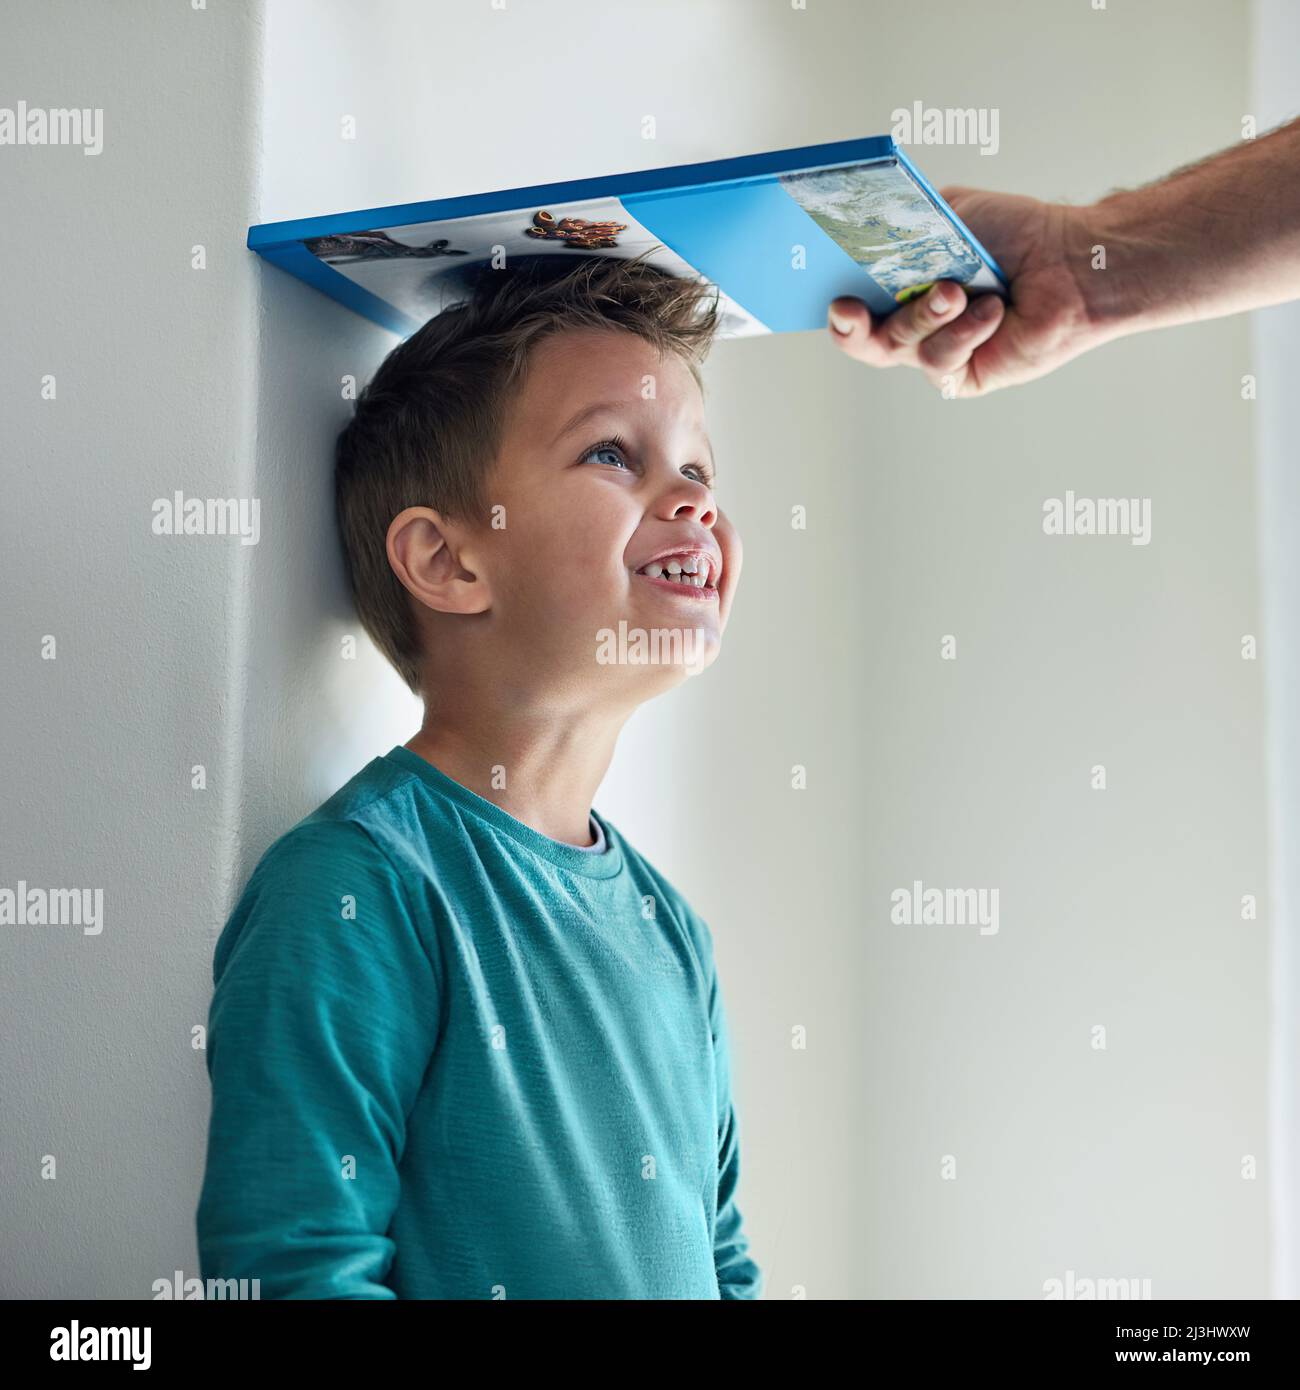 https://c8.alamy.com/comp/2J3HWXW/hes-getting-taller-and-taller-by-the-day-cropped-shot-of-a-little-boy-getting-his-height-measured-against-a-wall-with-a-book-2J3HWXW.jpg